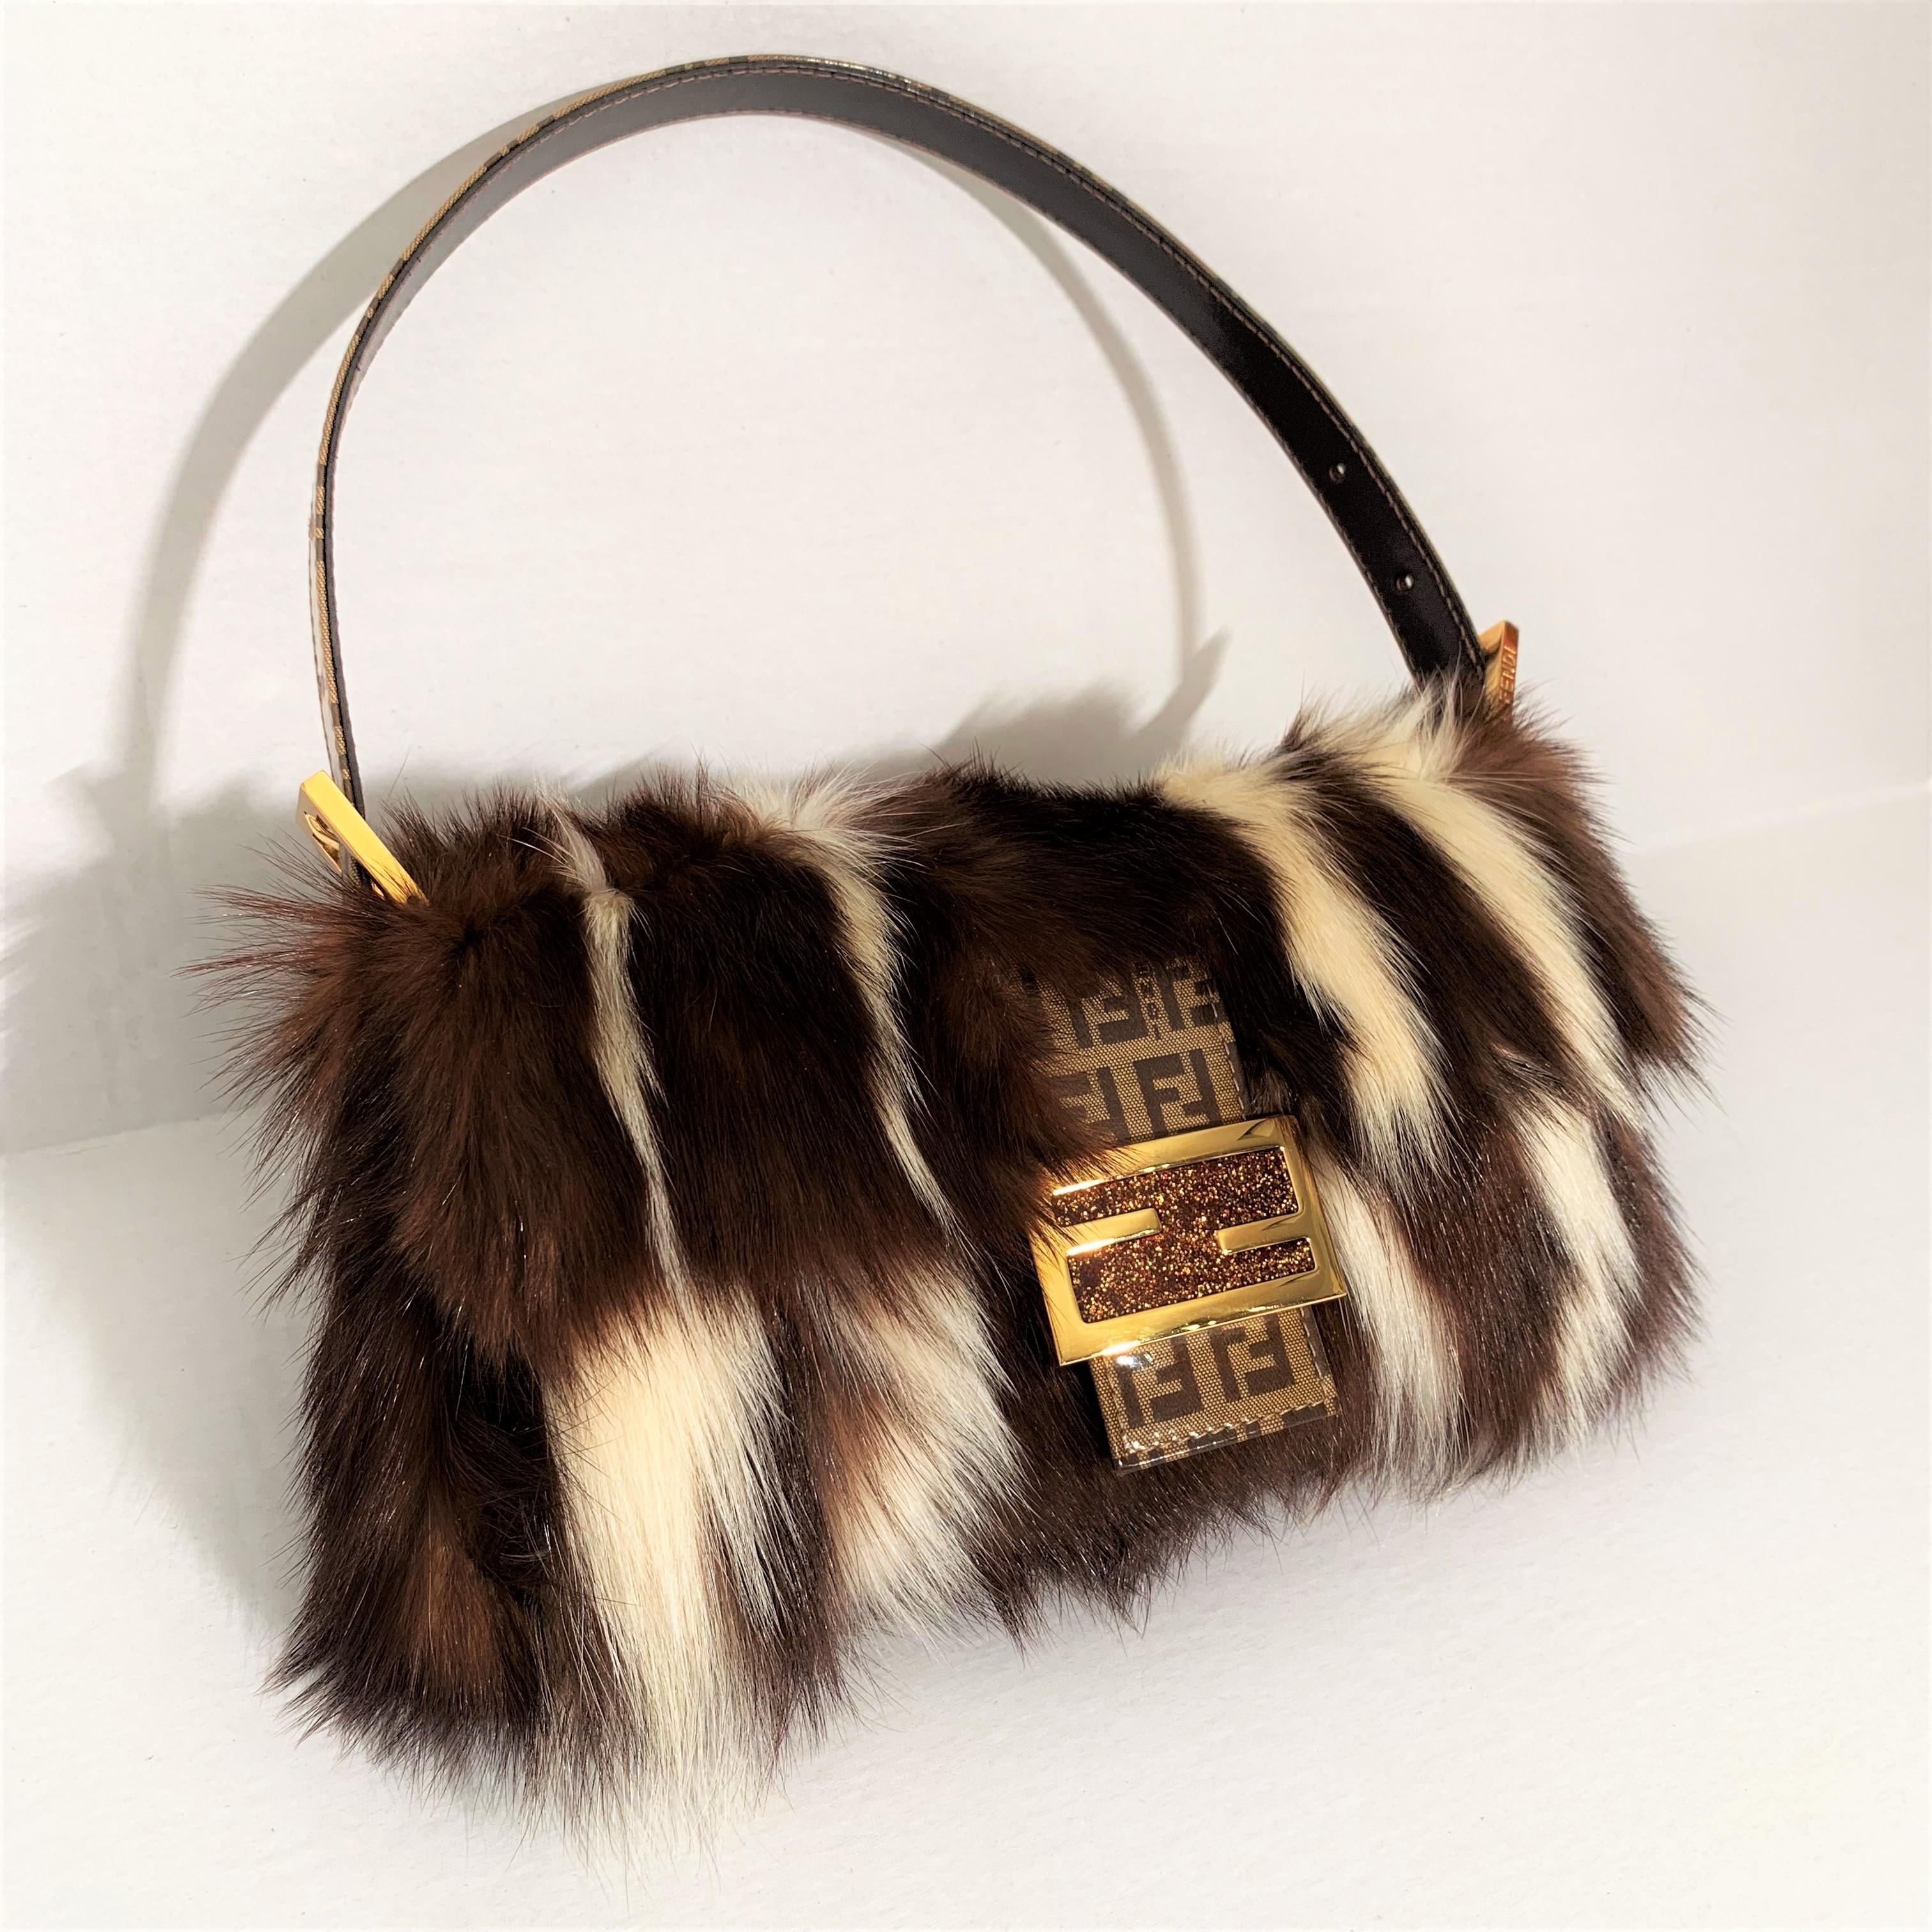 New Rare Fendi Fur Baguette Bag Featured in the 15th Anniversary Book Lt Edition 4